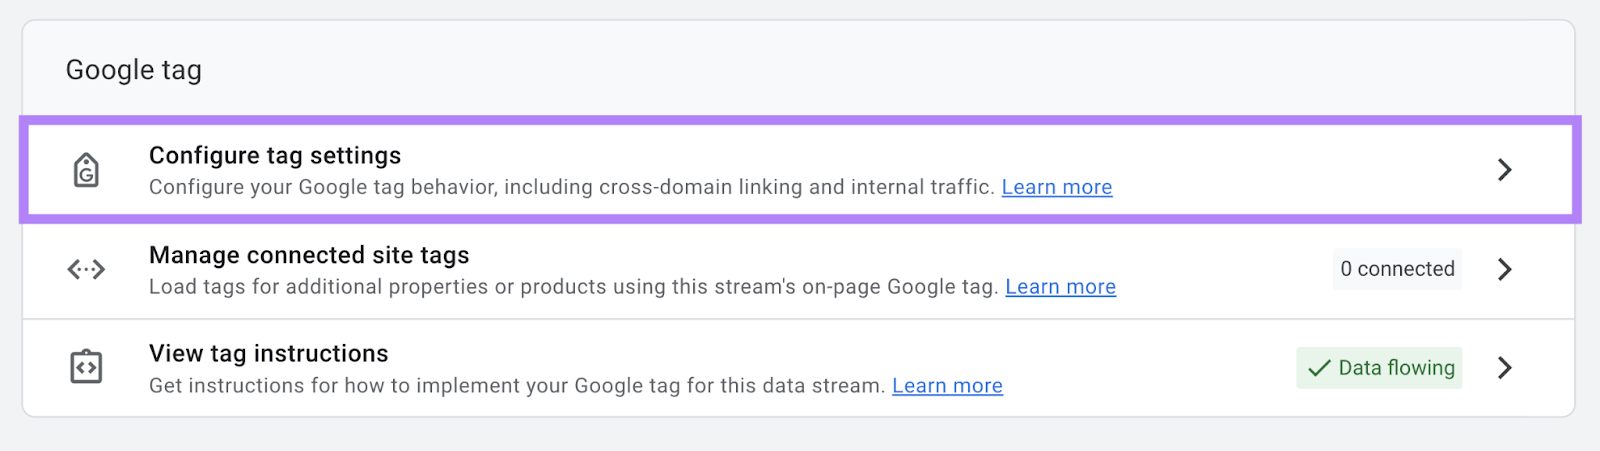 “Configure tag settings” option highlighted under "Google tag" section